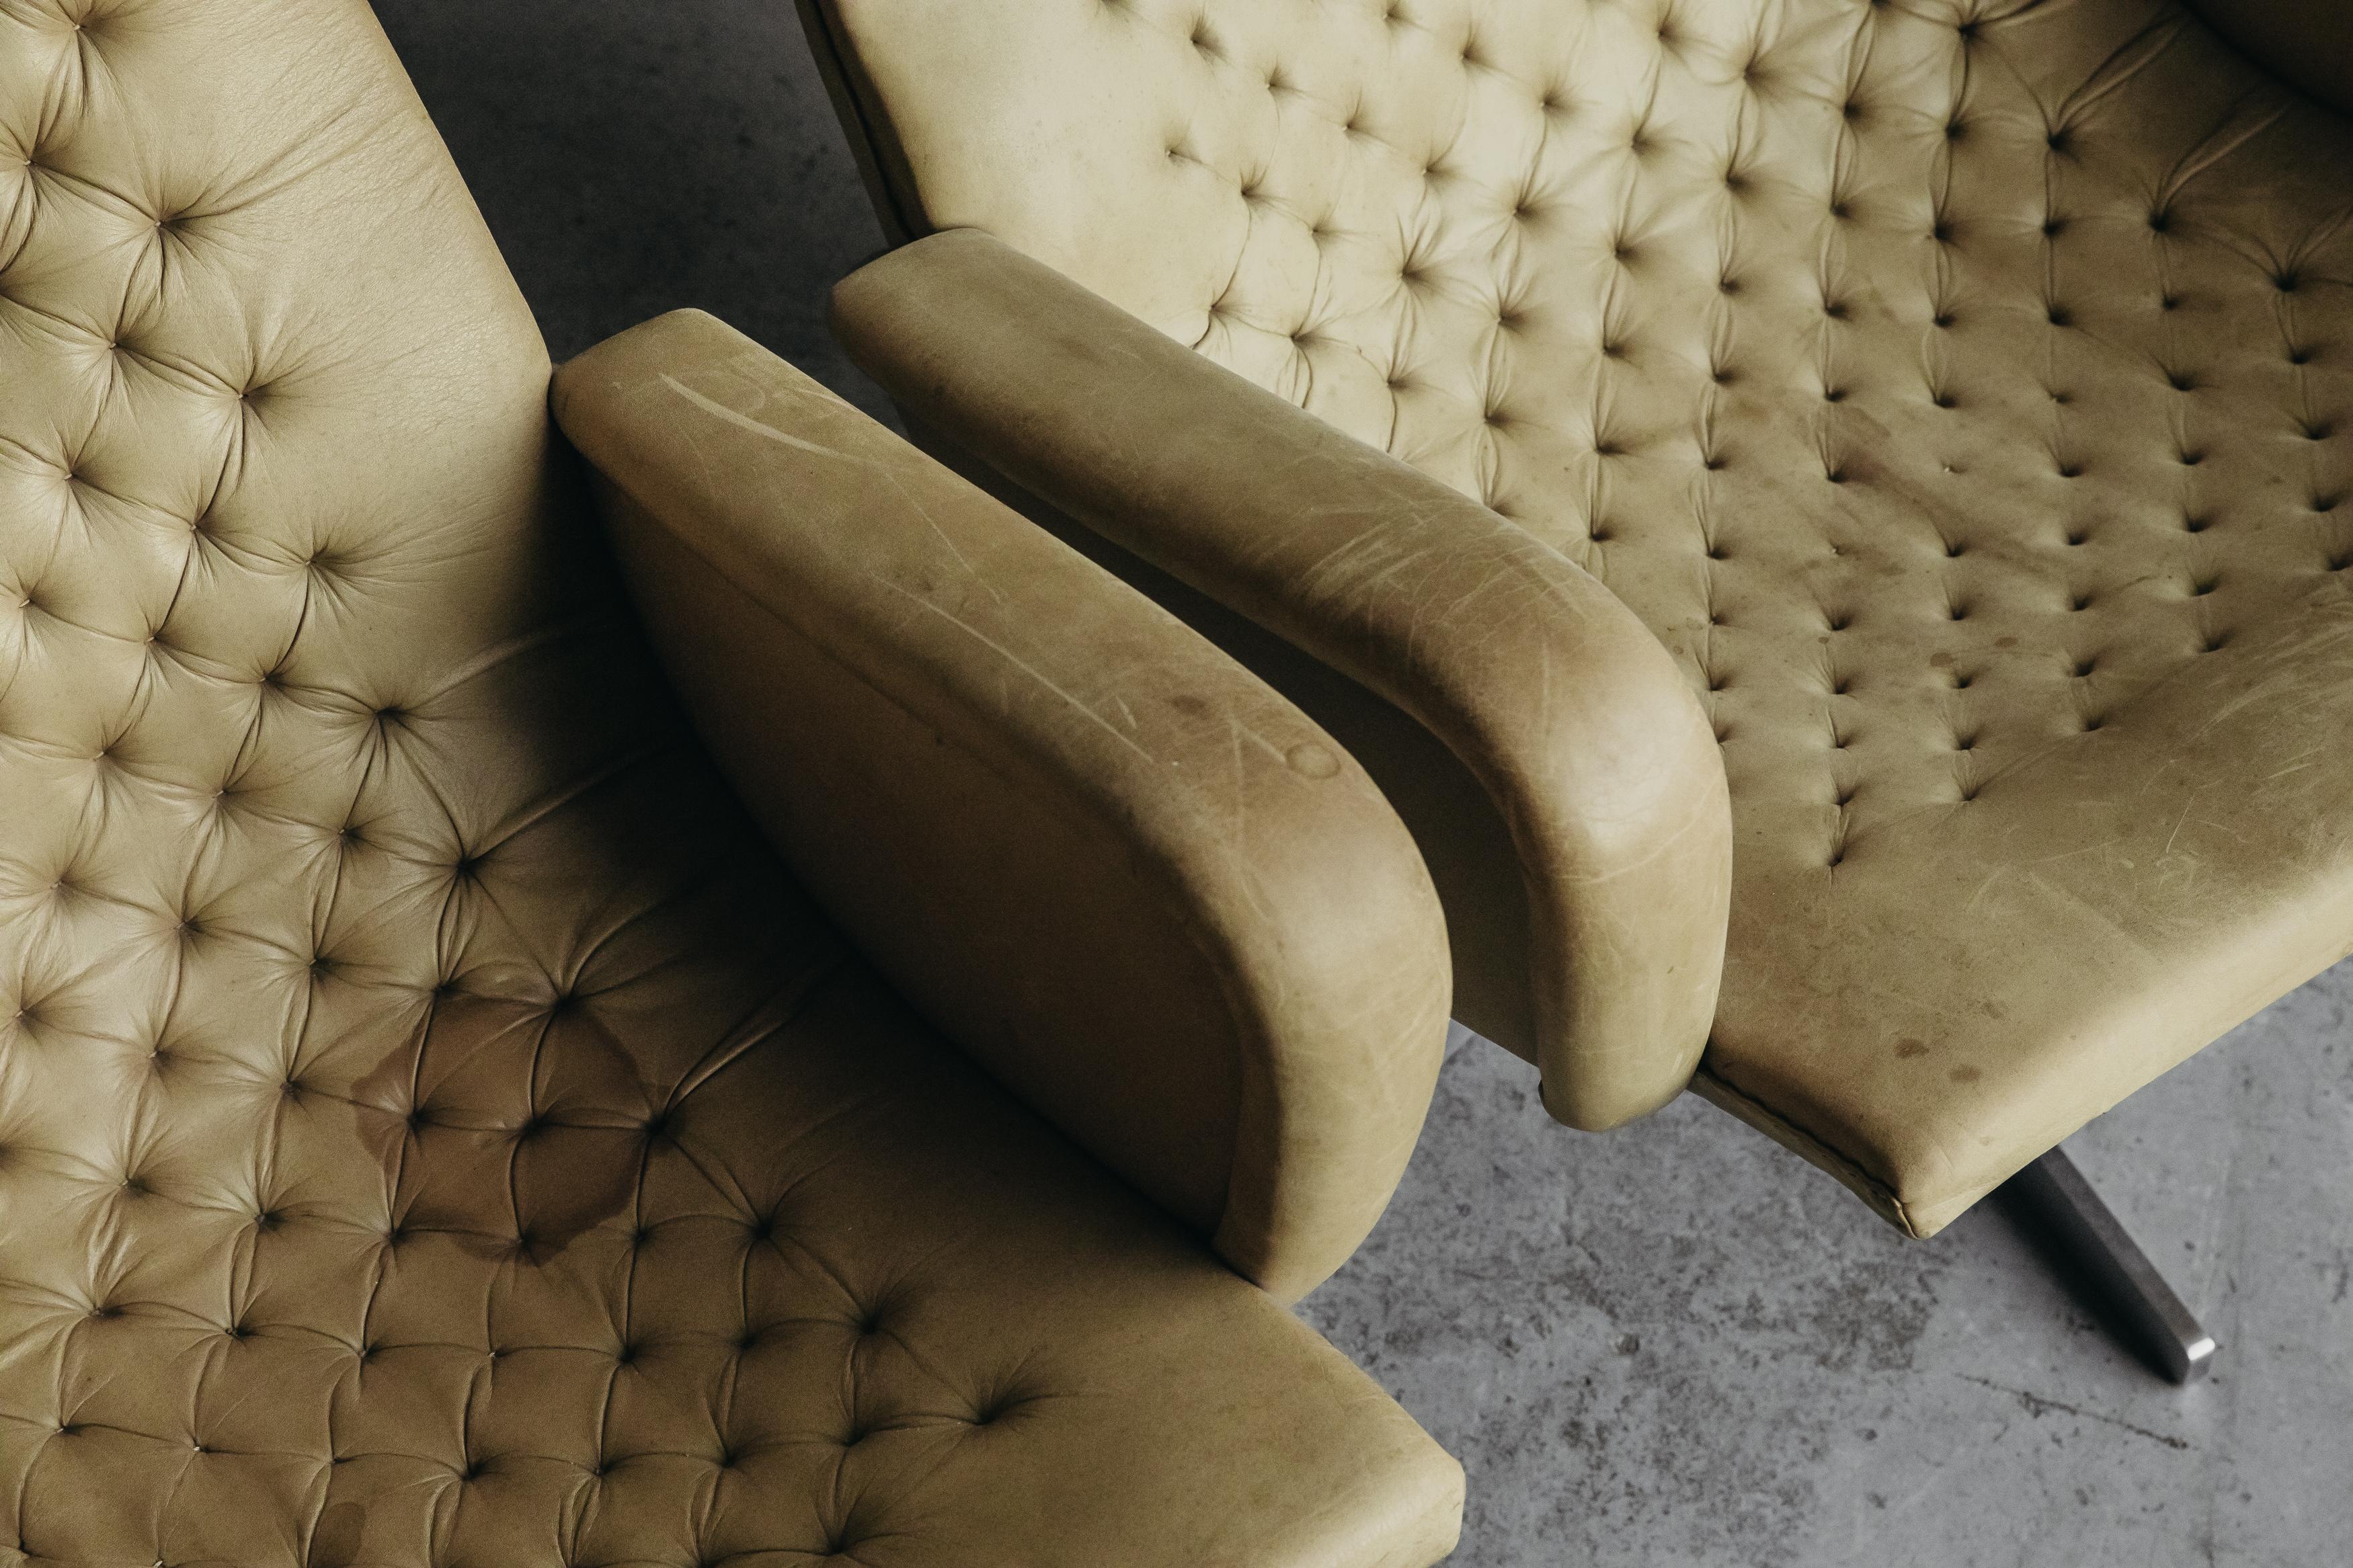 Late 20th Century Vintage Pair of De Sede Swivel Lounge Chairs from Switzerland, circa 1970